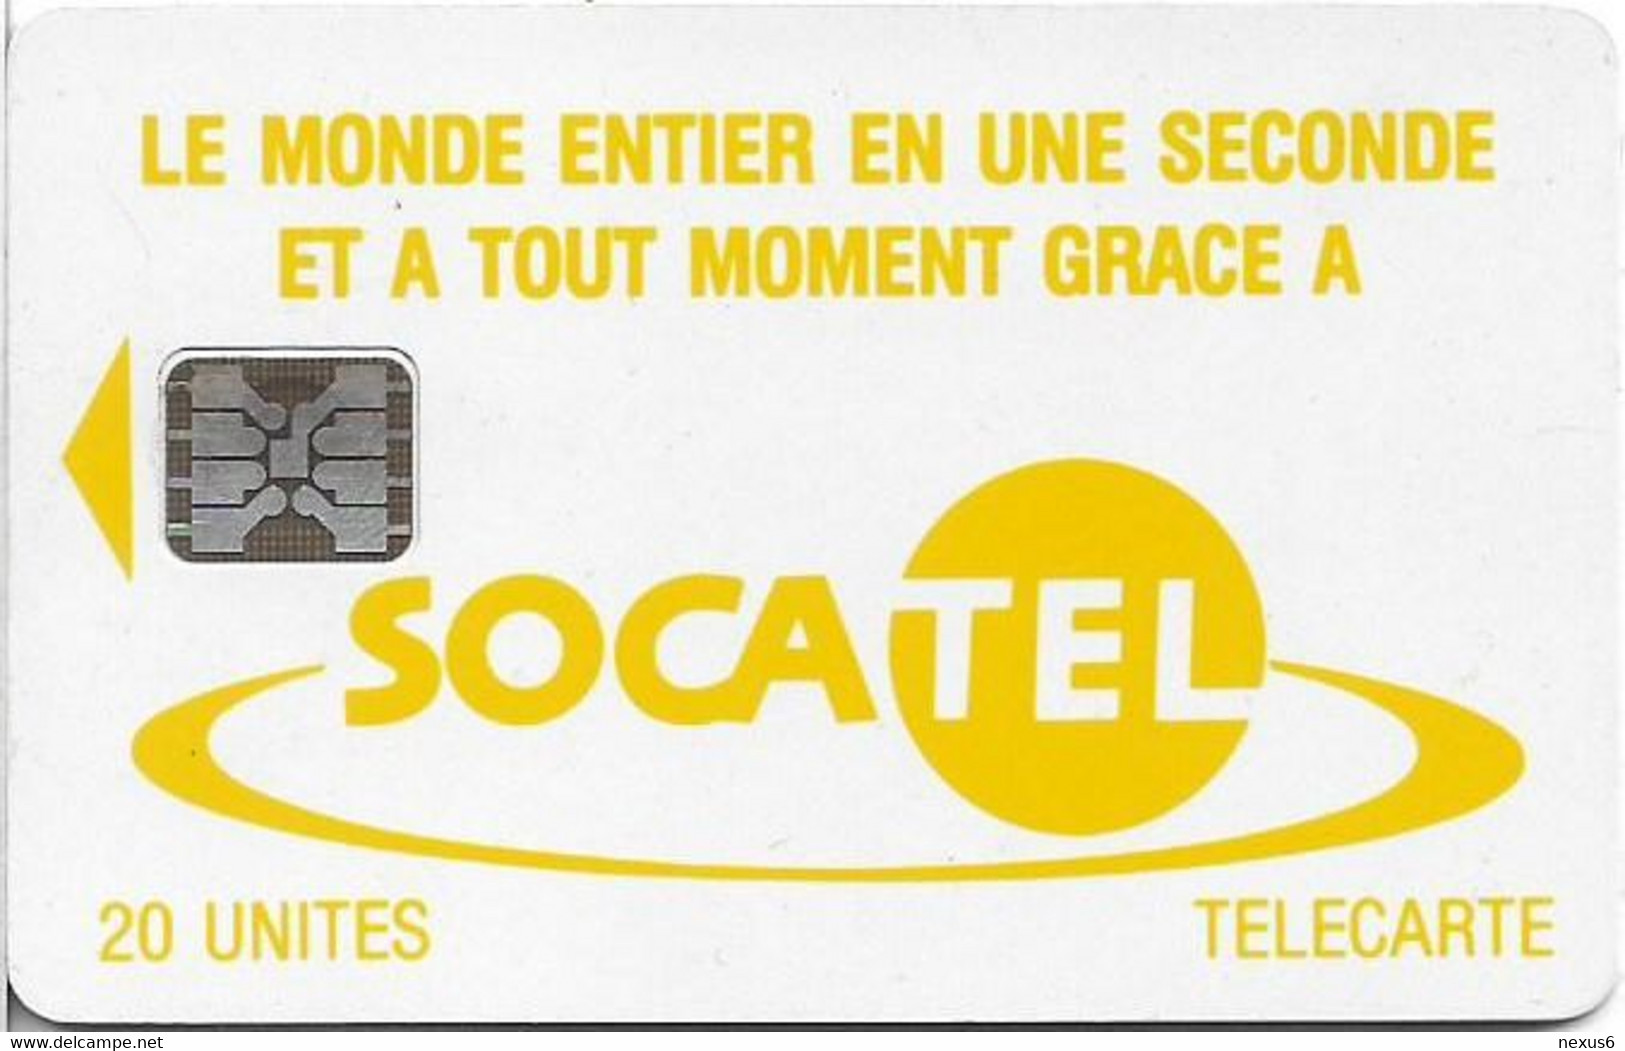 Central African Rep. - Socatel - Logo Yellow, SC5 (Cn. 00547), 20Units, Used - Central African Republic